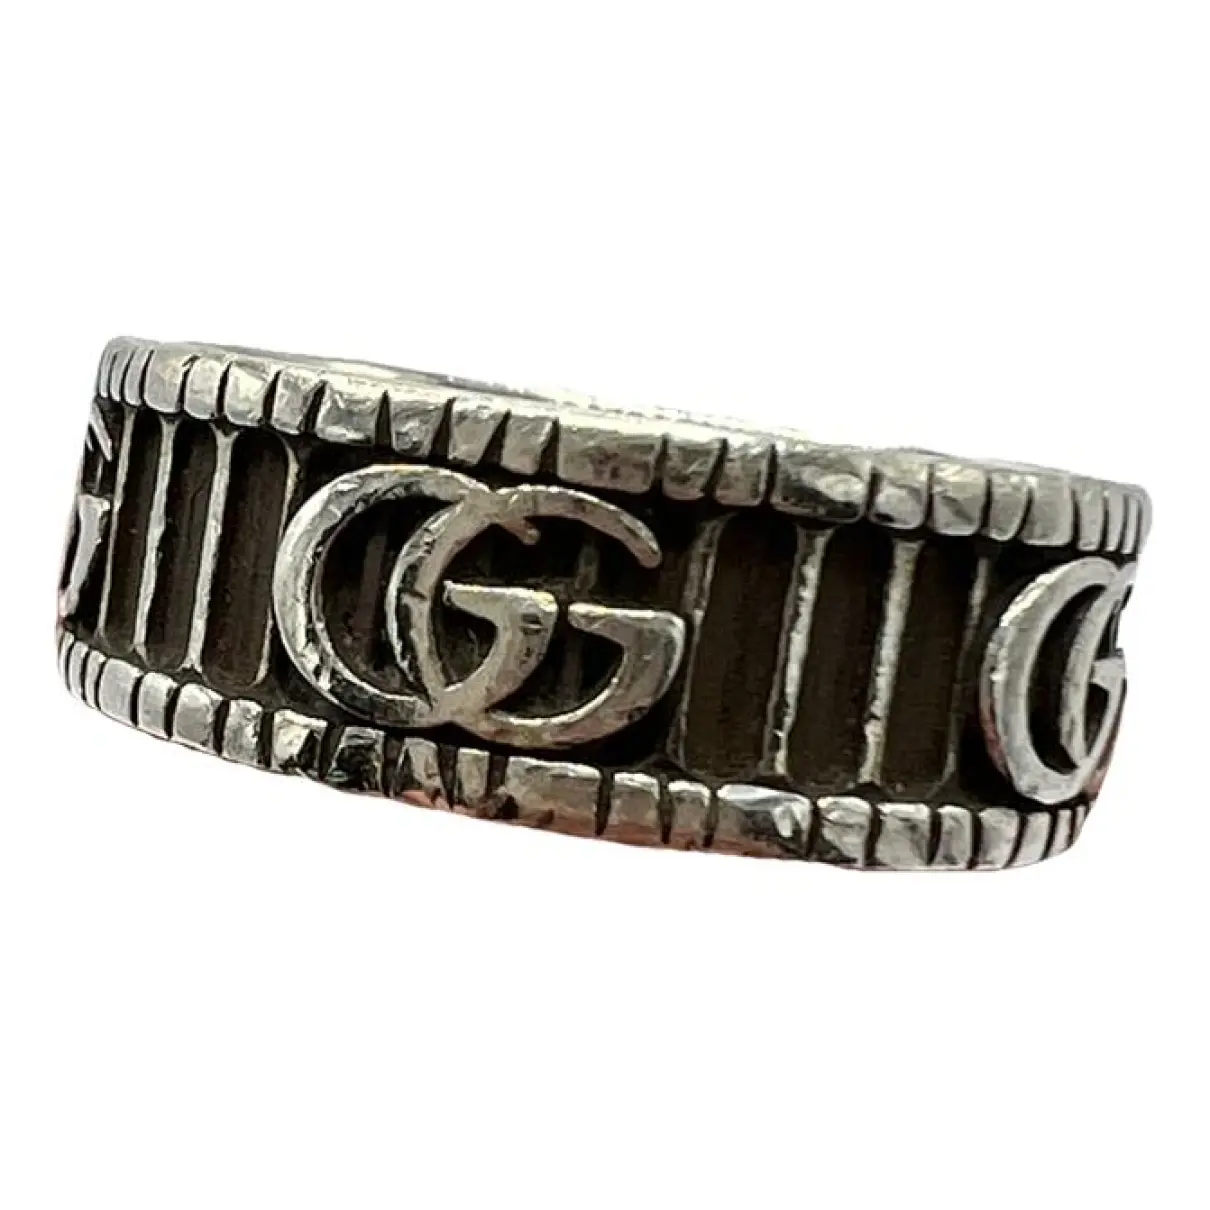 Icon silver ring